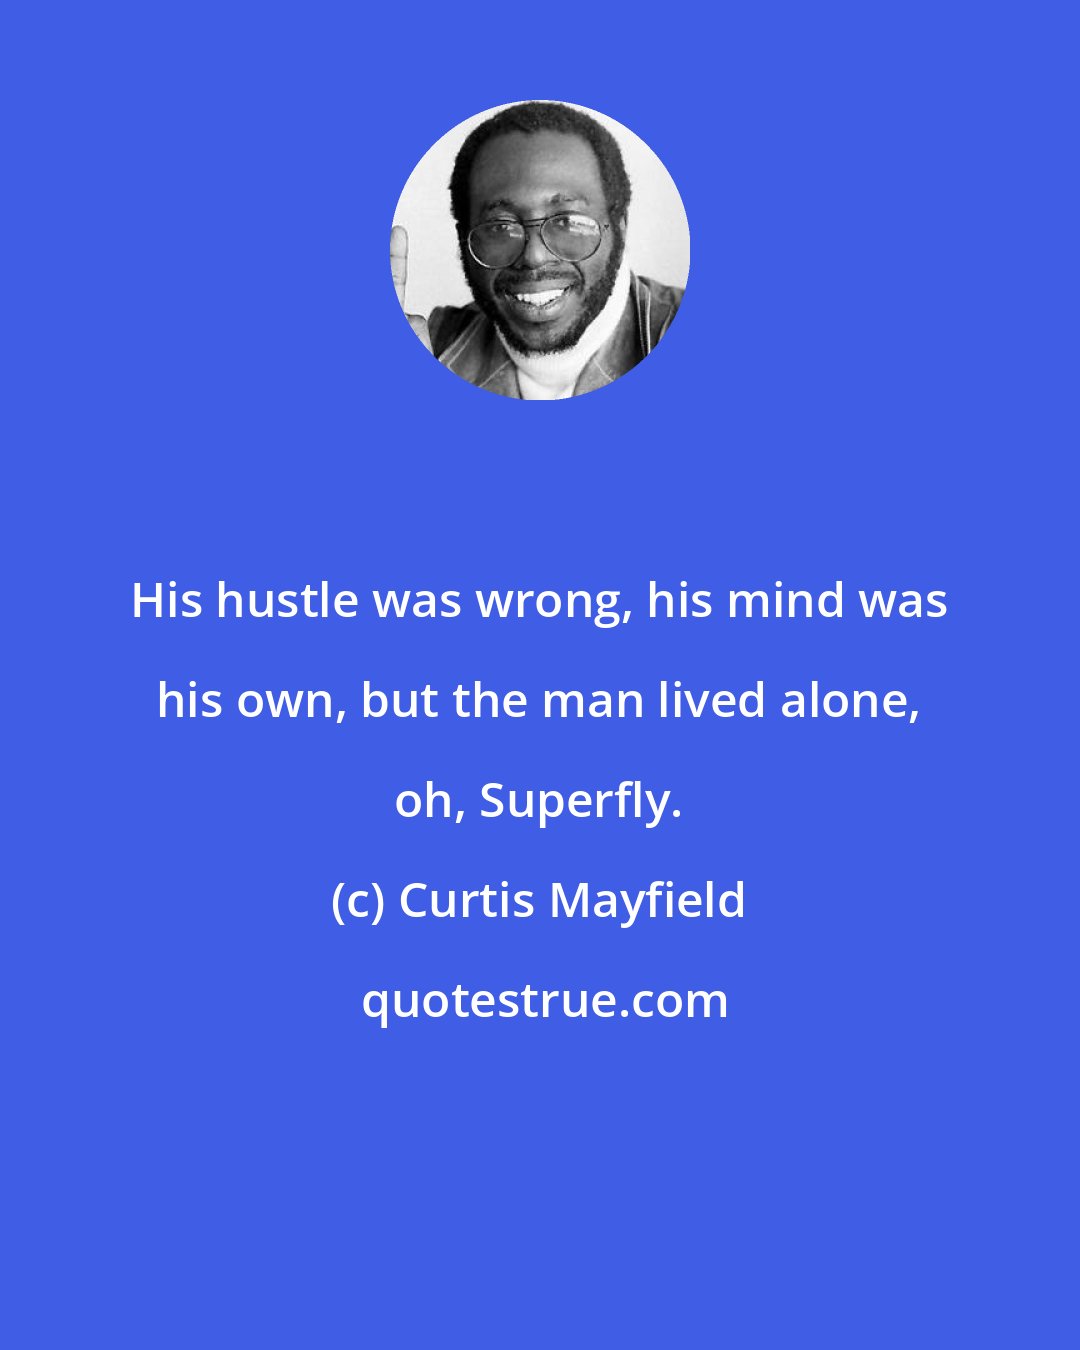 Curtis Mayfield: His hustle was wrong, his mind was his own, but the man lived alone, oh, Superfly.